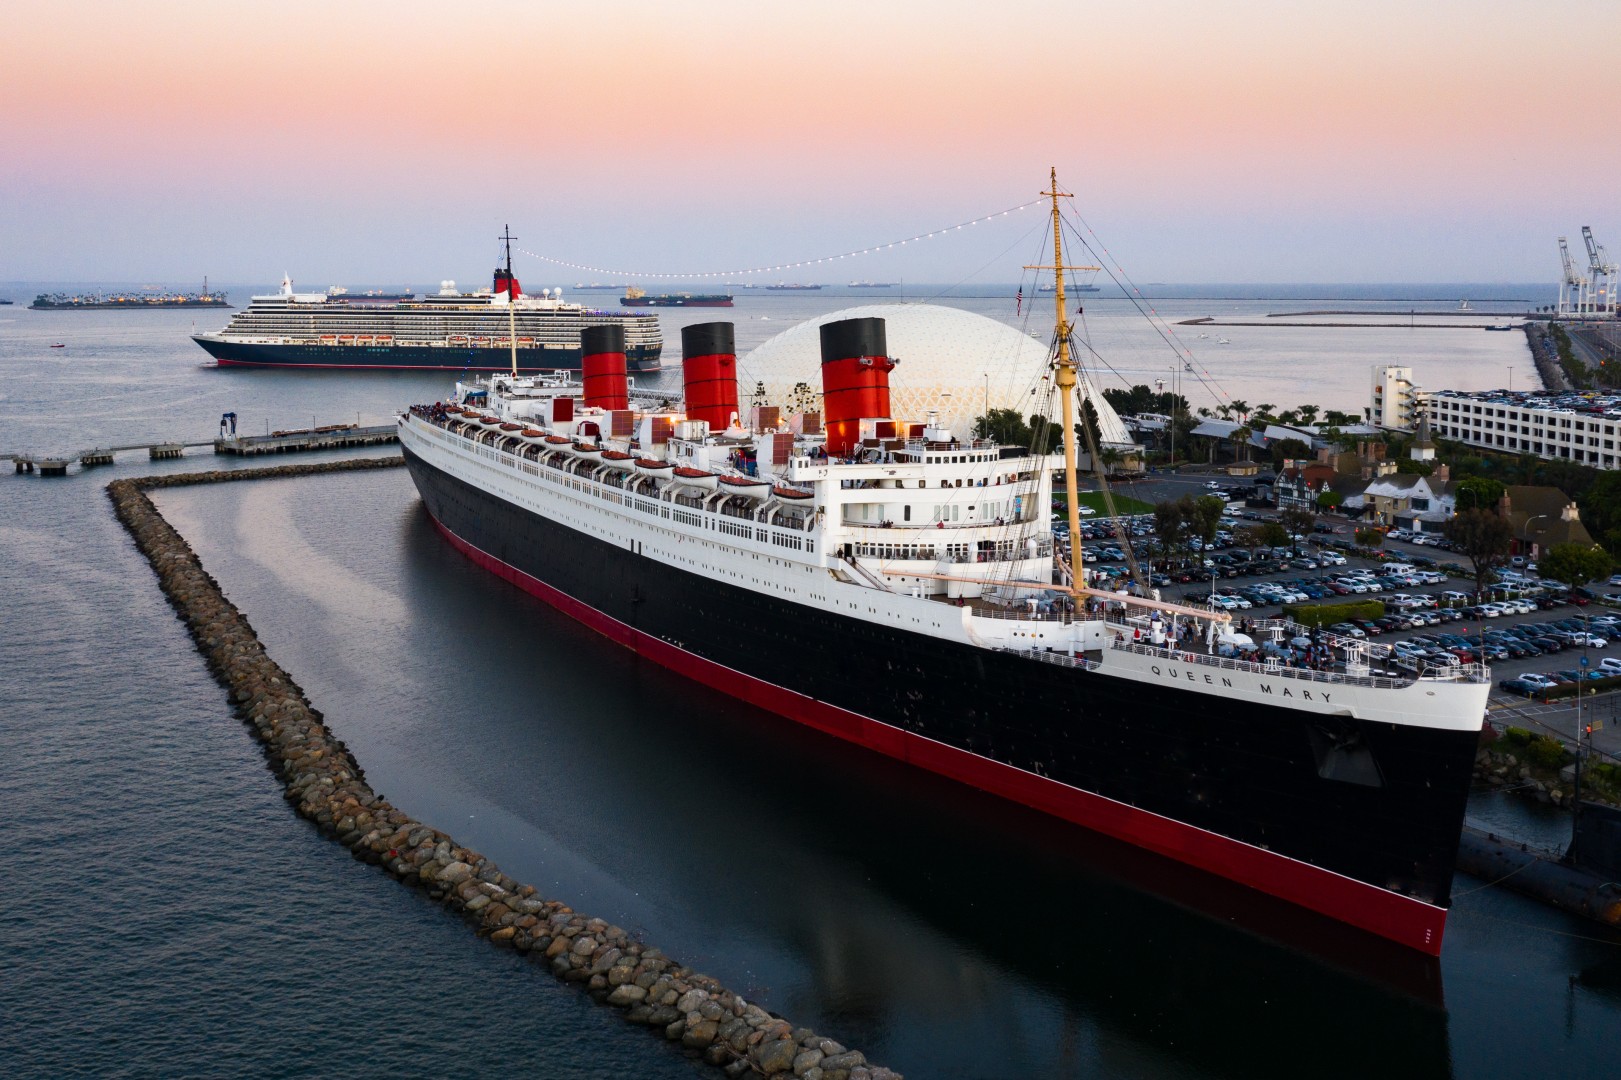 is the queen mary open for tours 2022